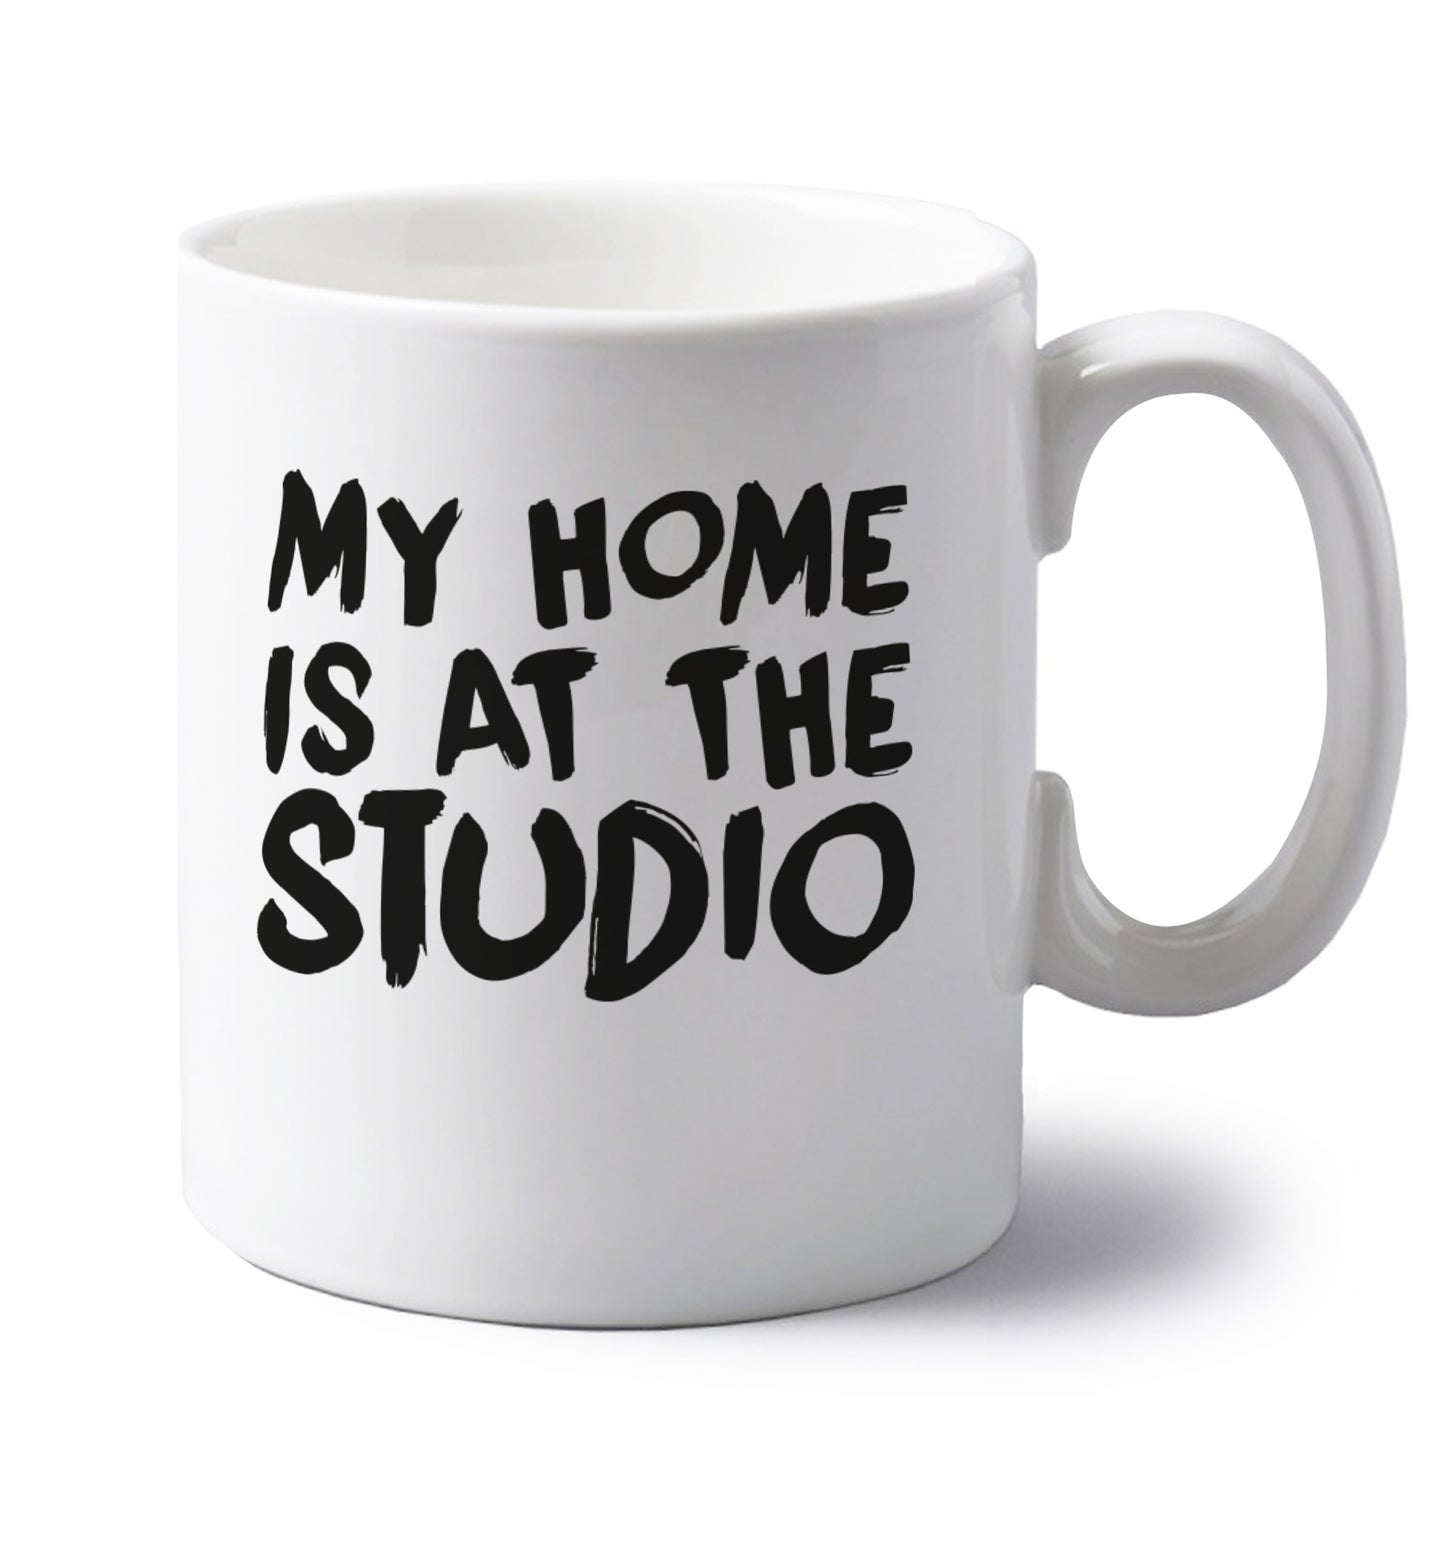 My home is at the library left handed white ceramic mug 